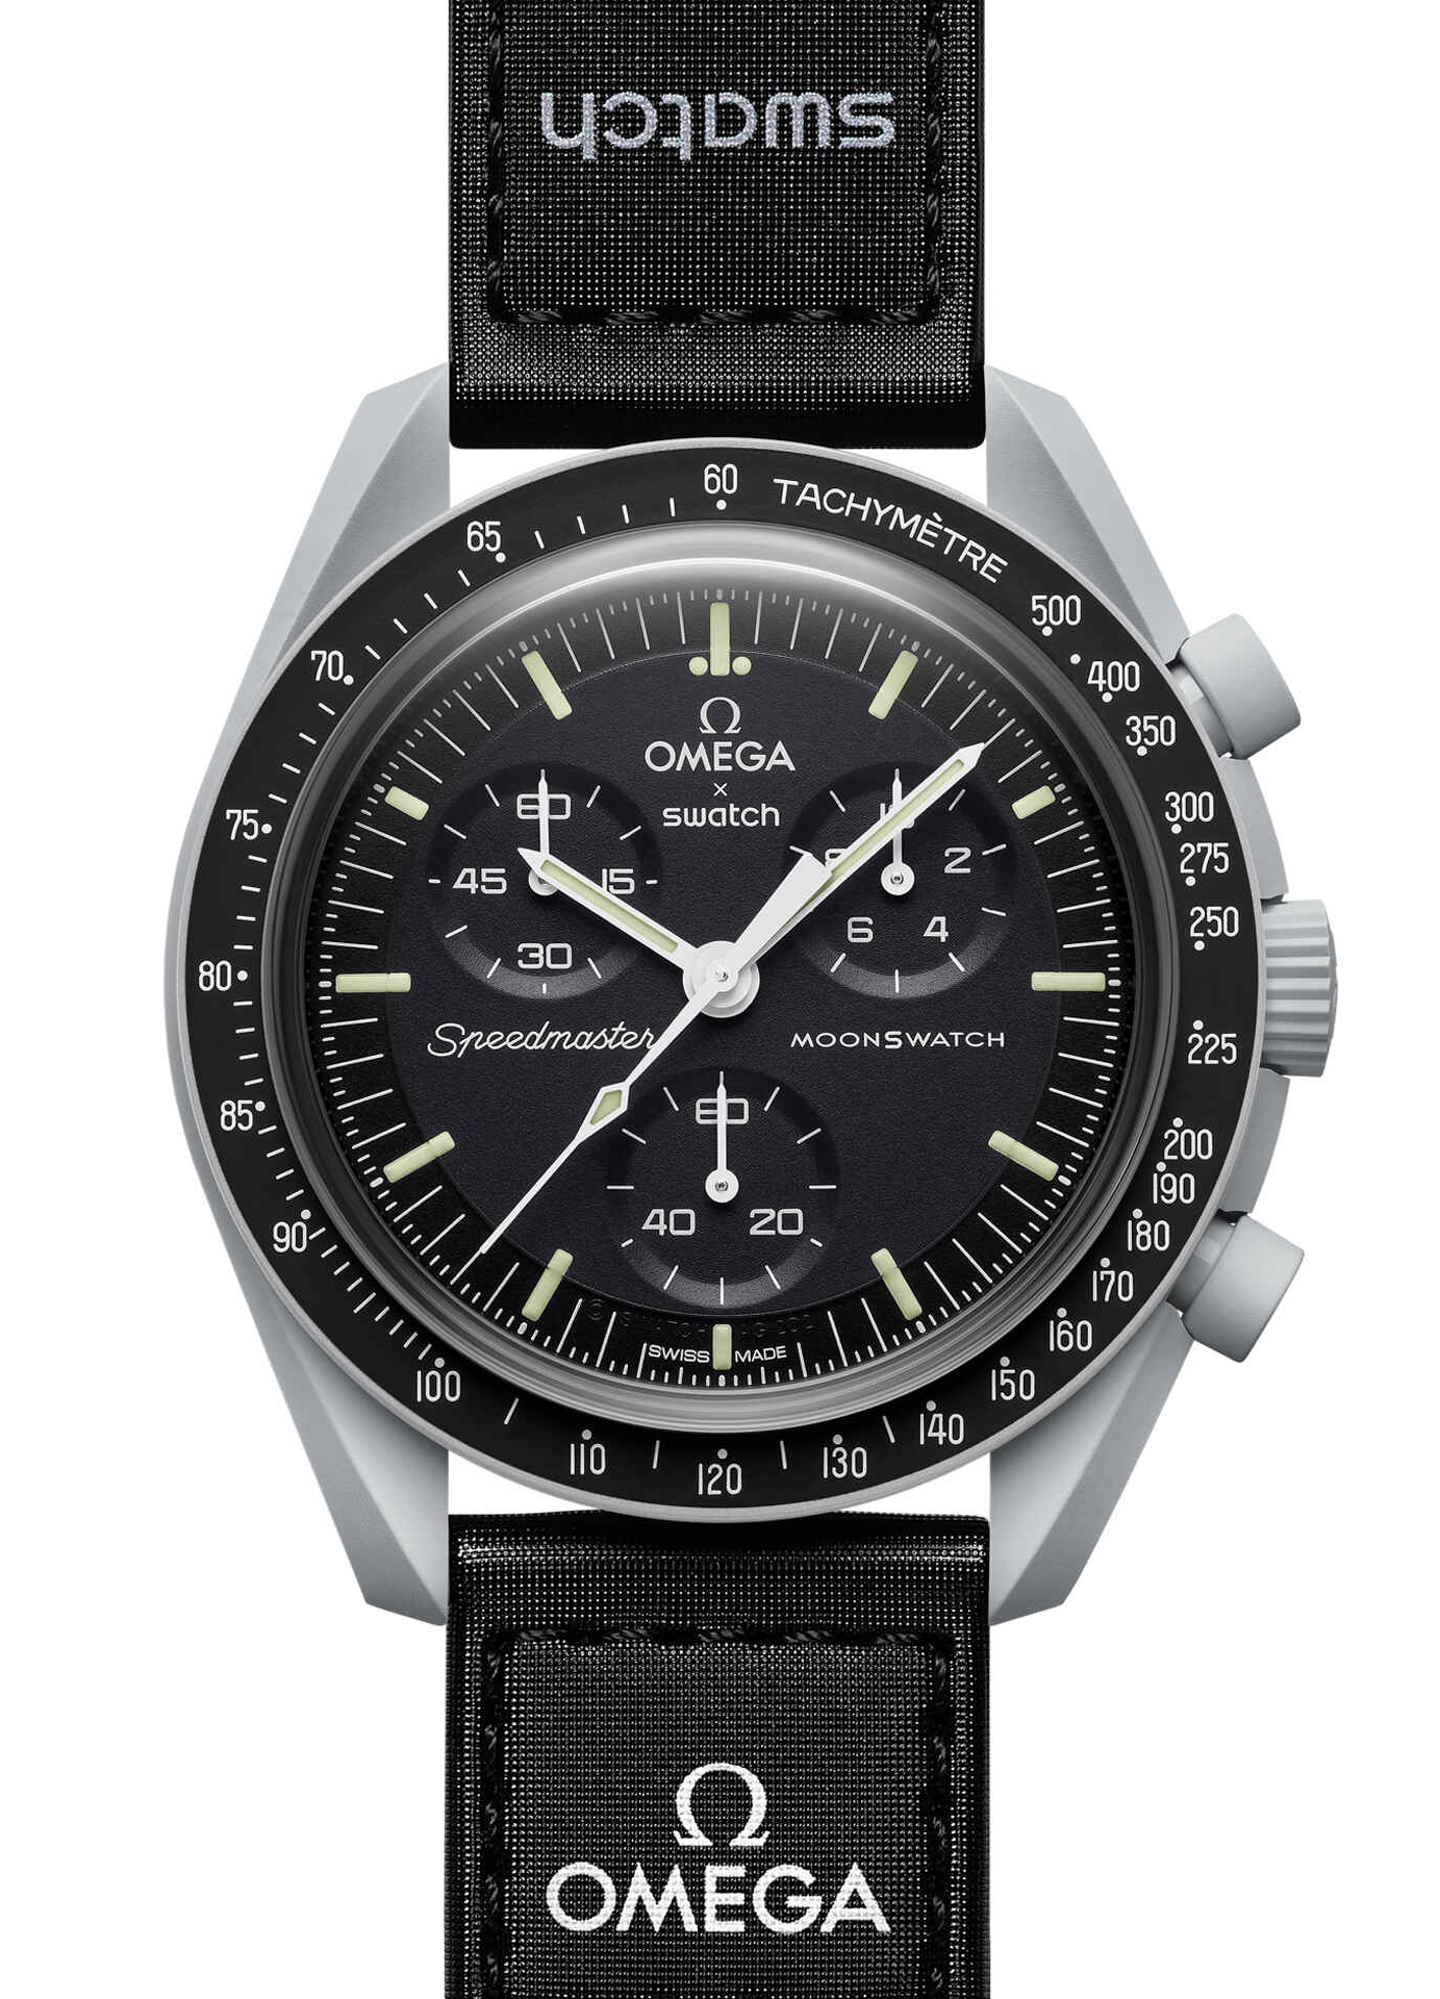 Omega swatch